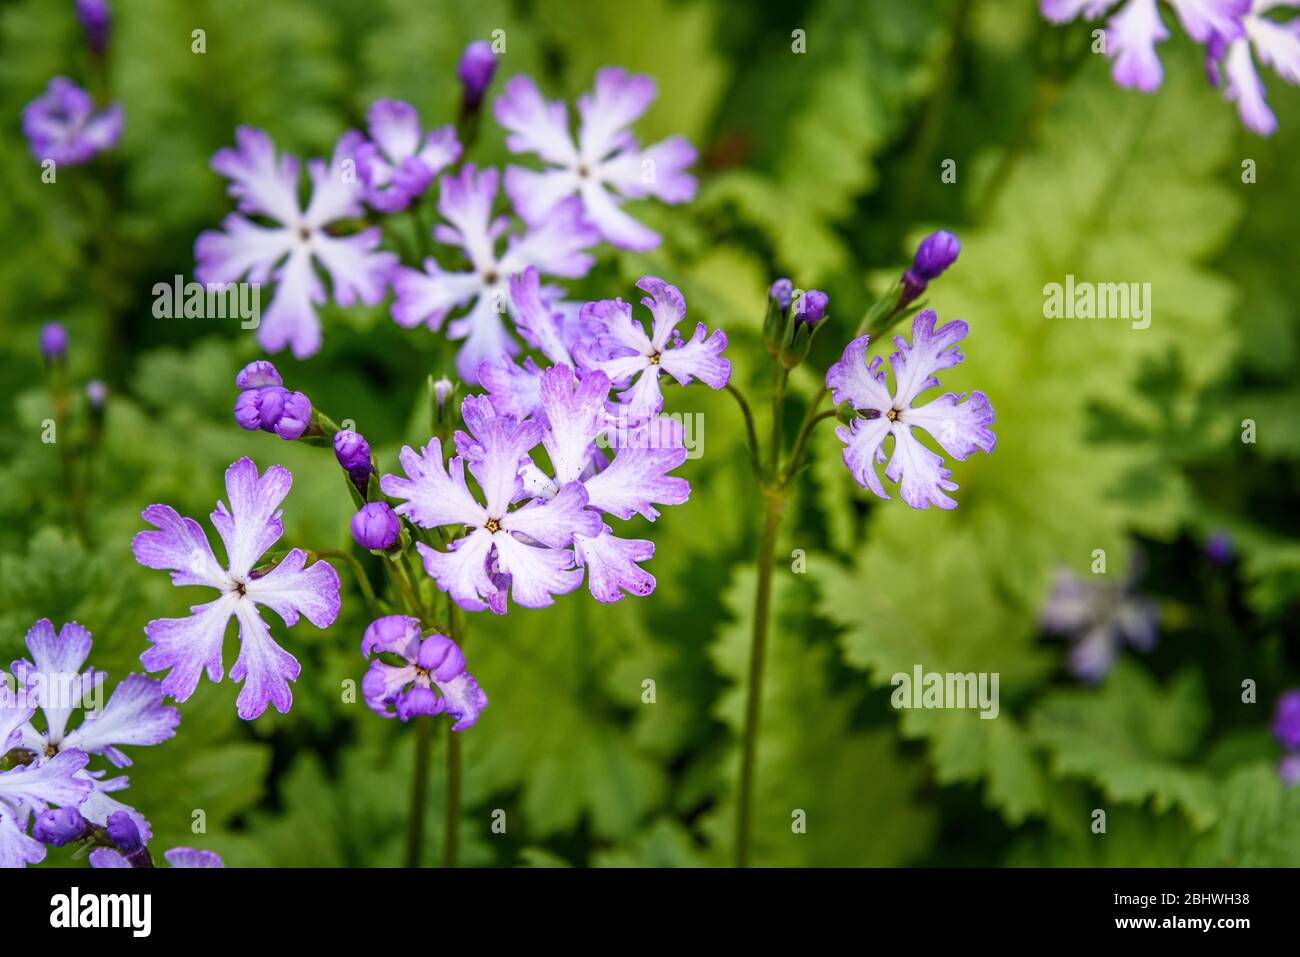 Purple and white asiatic primrose blooming in a garden Stock Photo